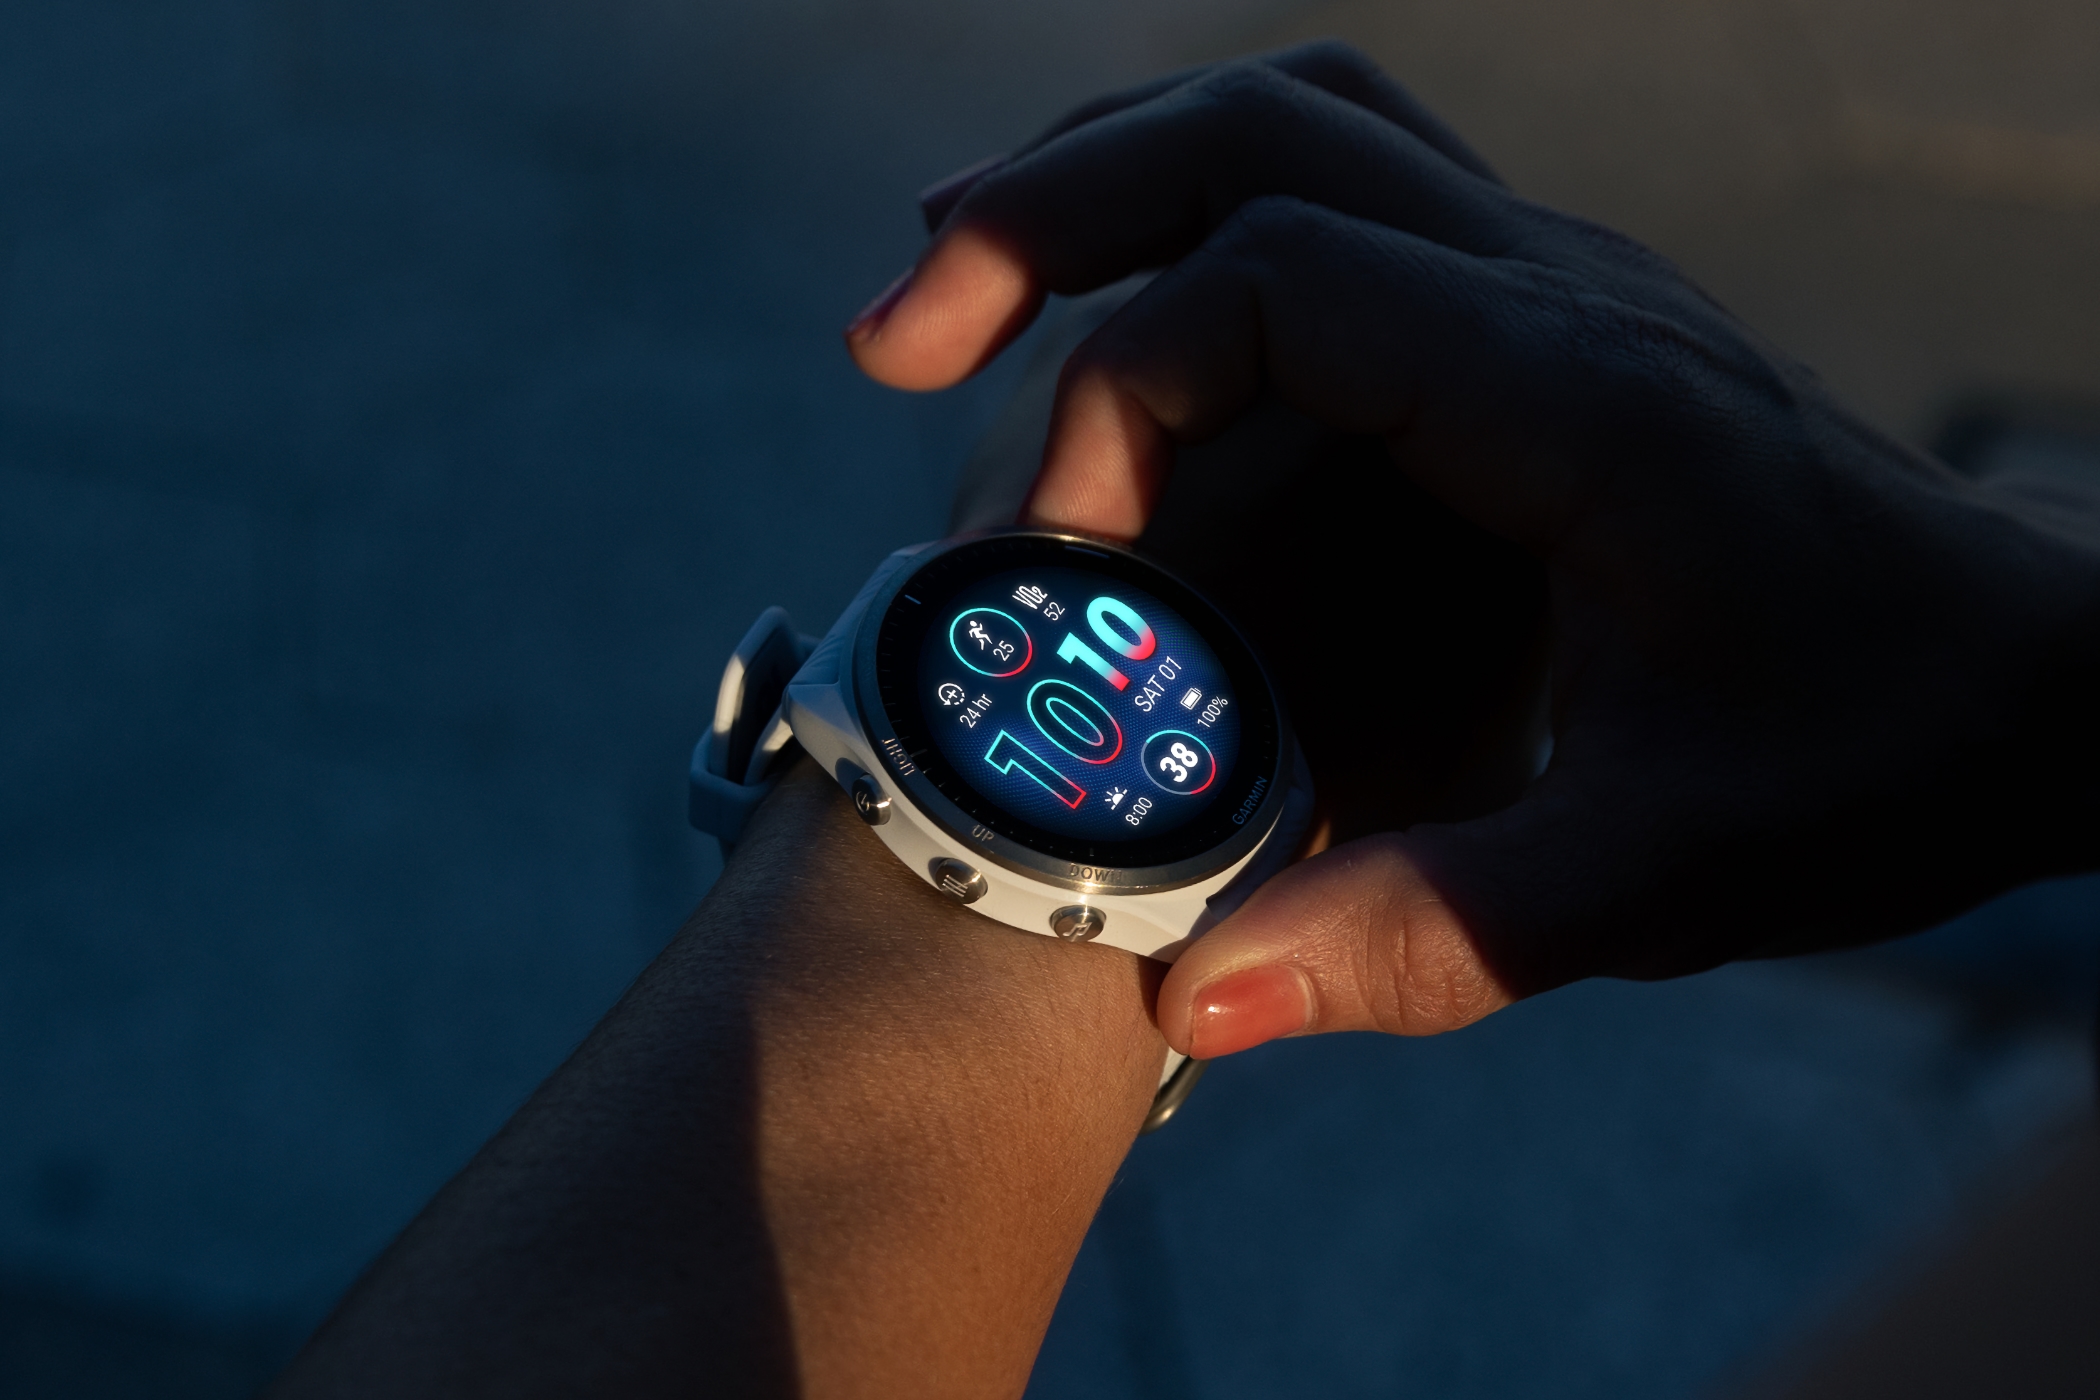 Garmin's new Forerunner 965 and 265 watches are all about AMOLED